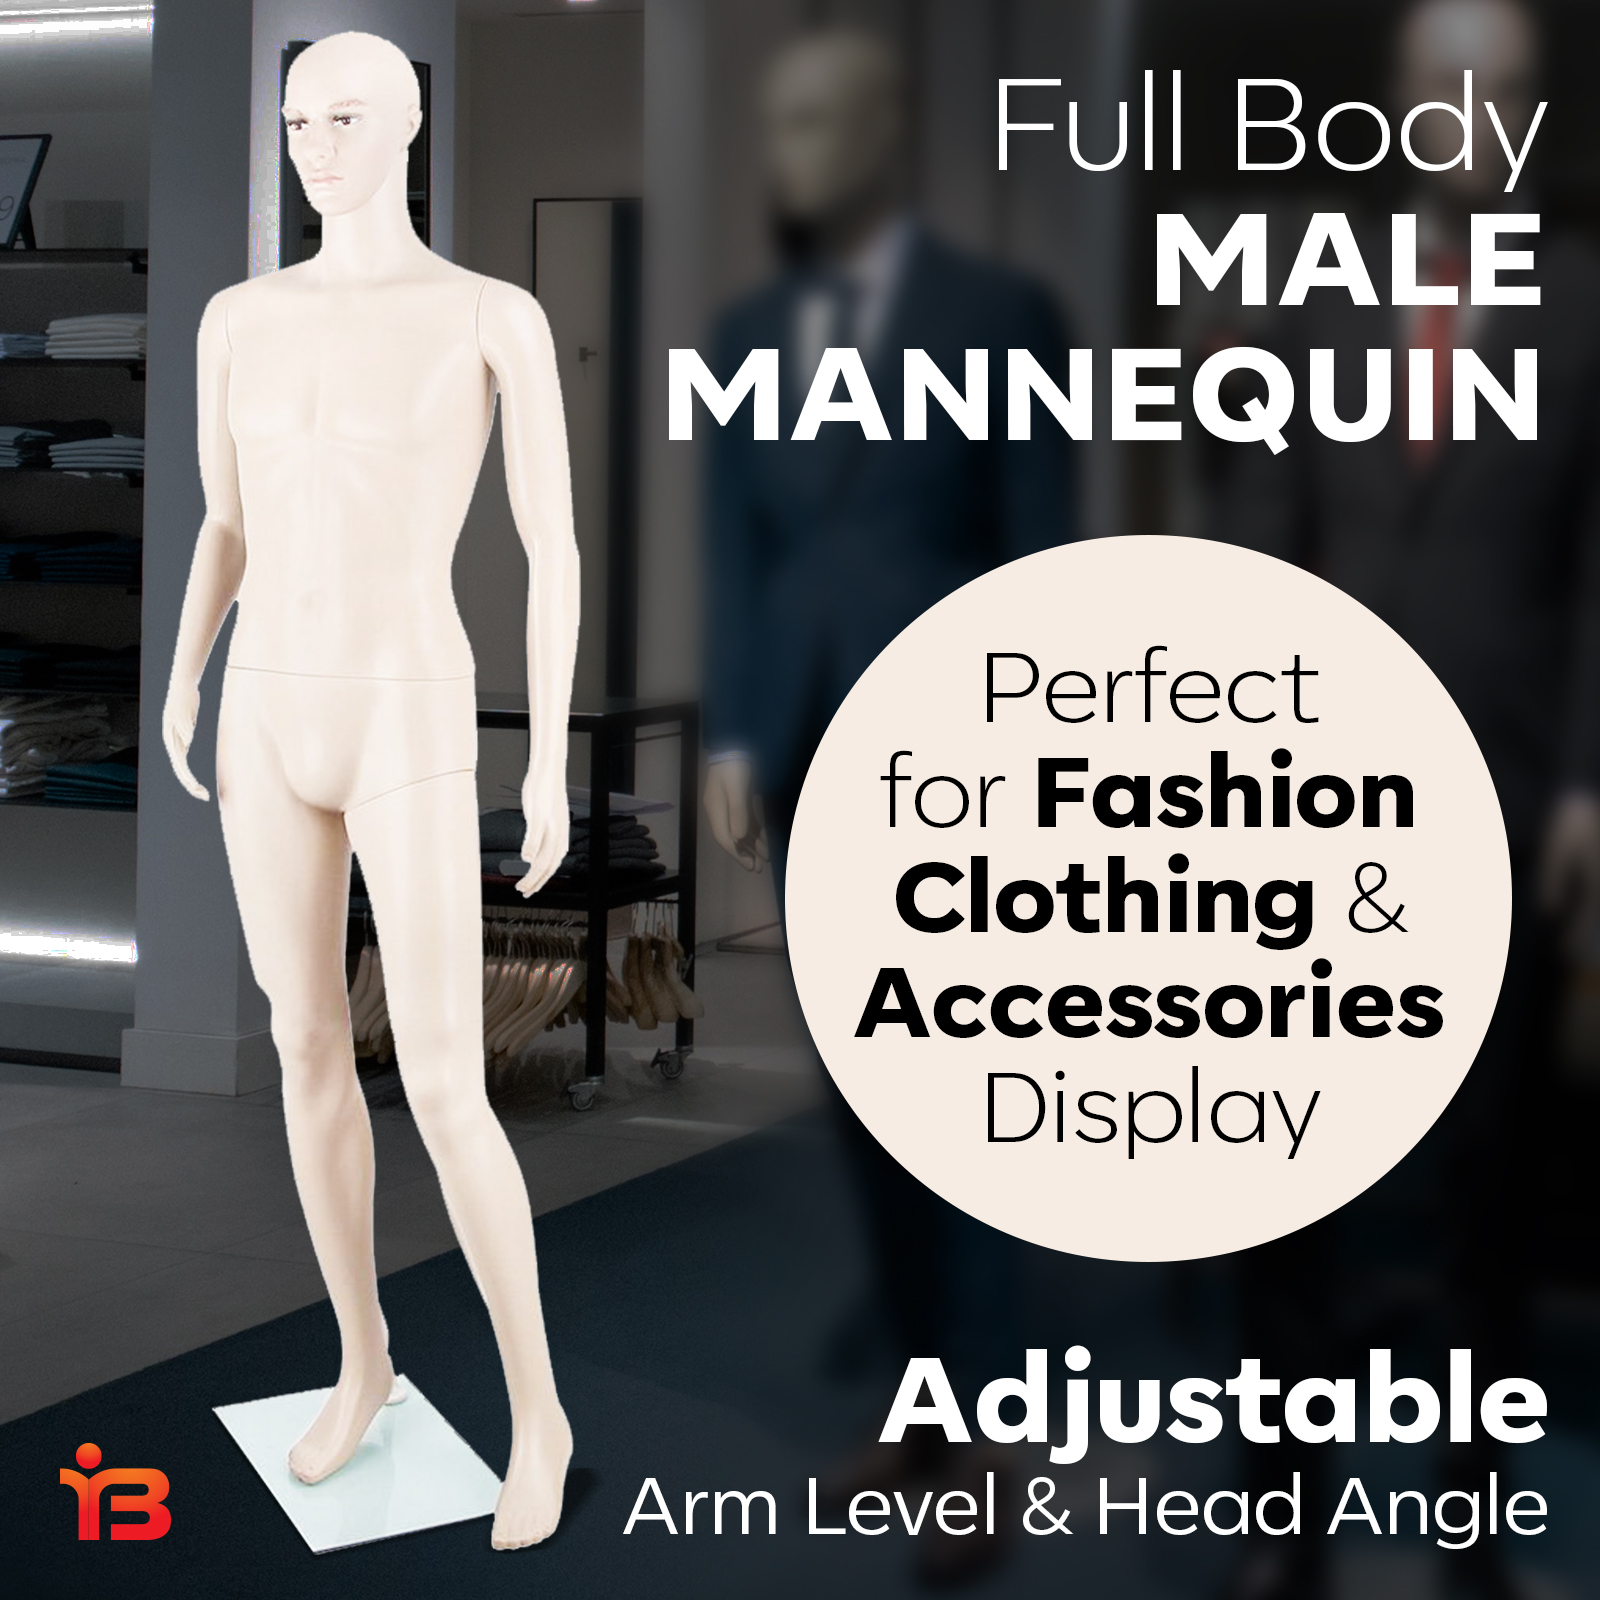 Skin Coloured Mannequin 186cm Tall Full Body Male Display 